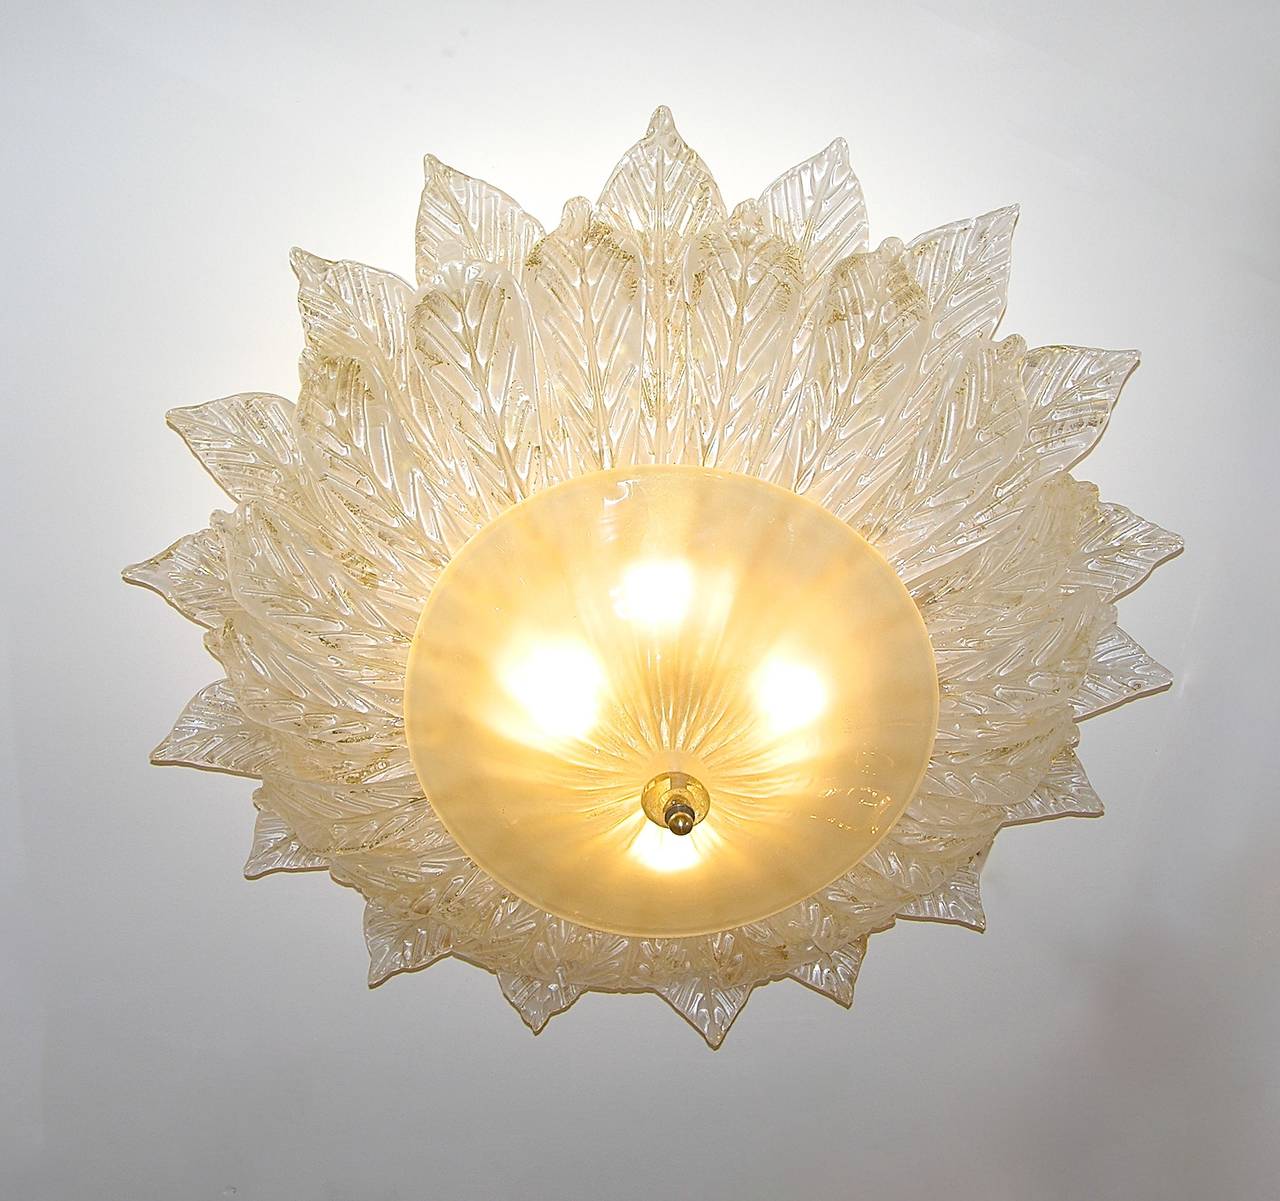 Very elegant 1960s Venetian work of art by Seguso Vetri d'Arte in opaline Murano glass, each leaf in blown glass is crafted individually and worked with pure expanded 24t gold on the surface. The blown bowl in perfect shape is worked with speckles